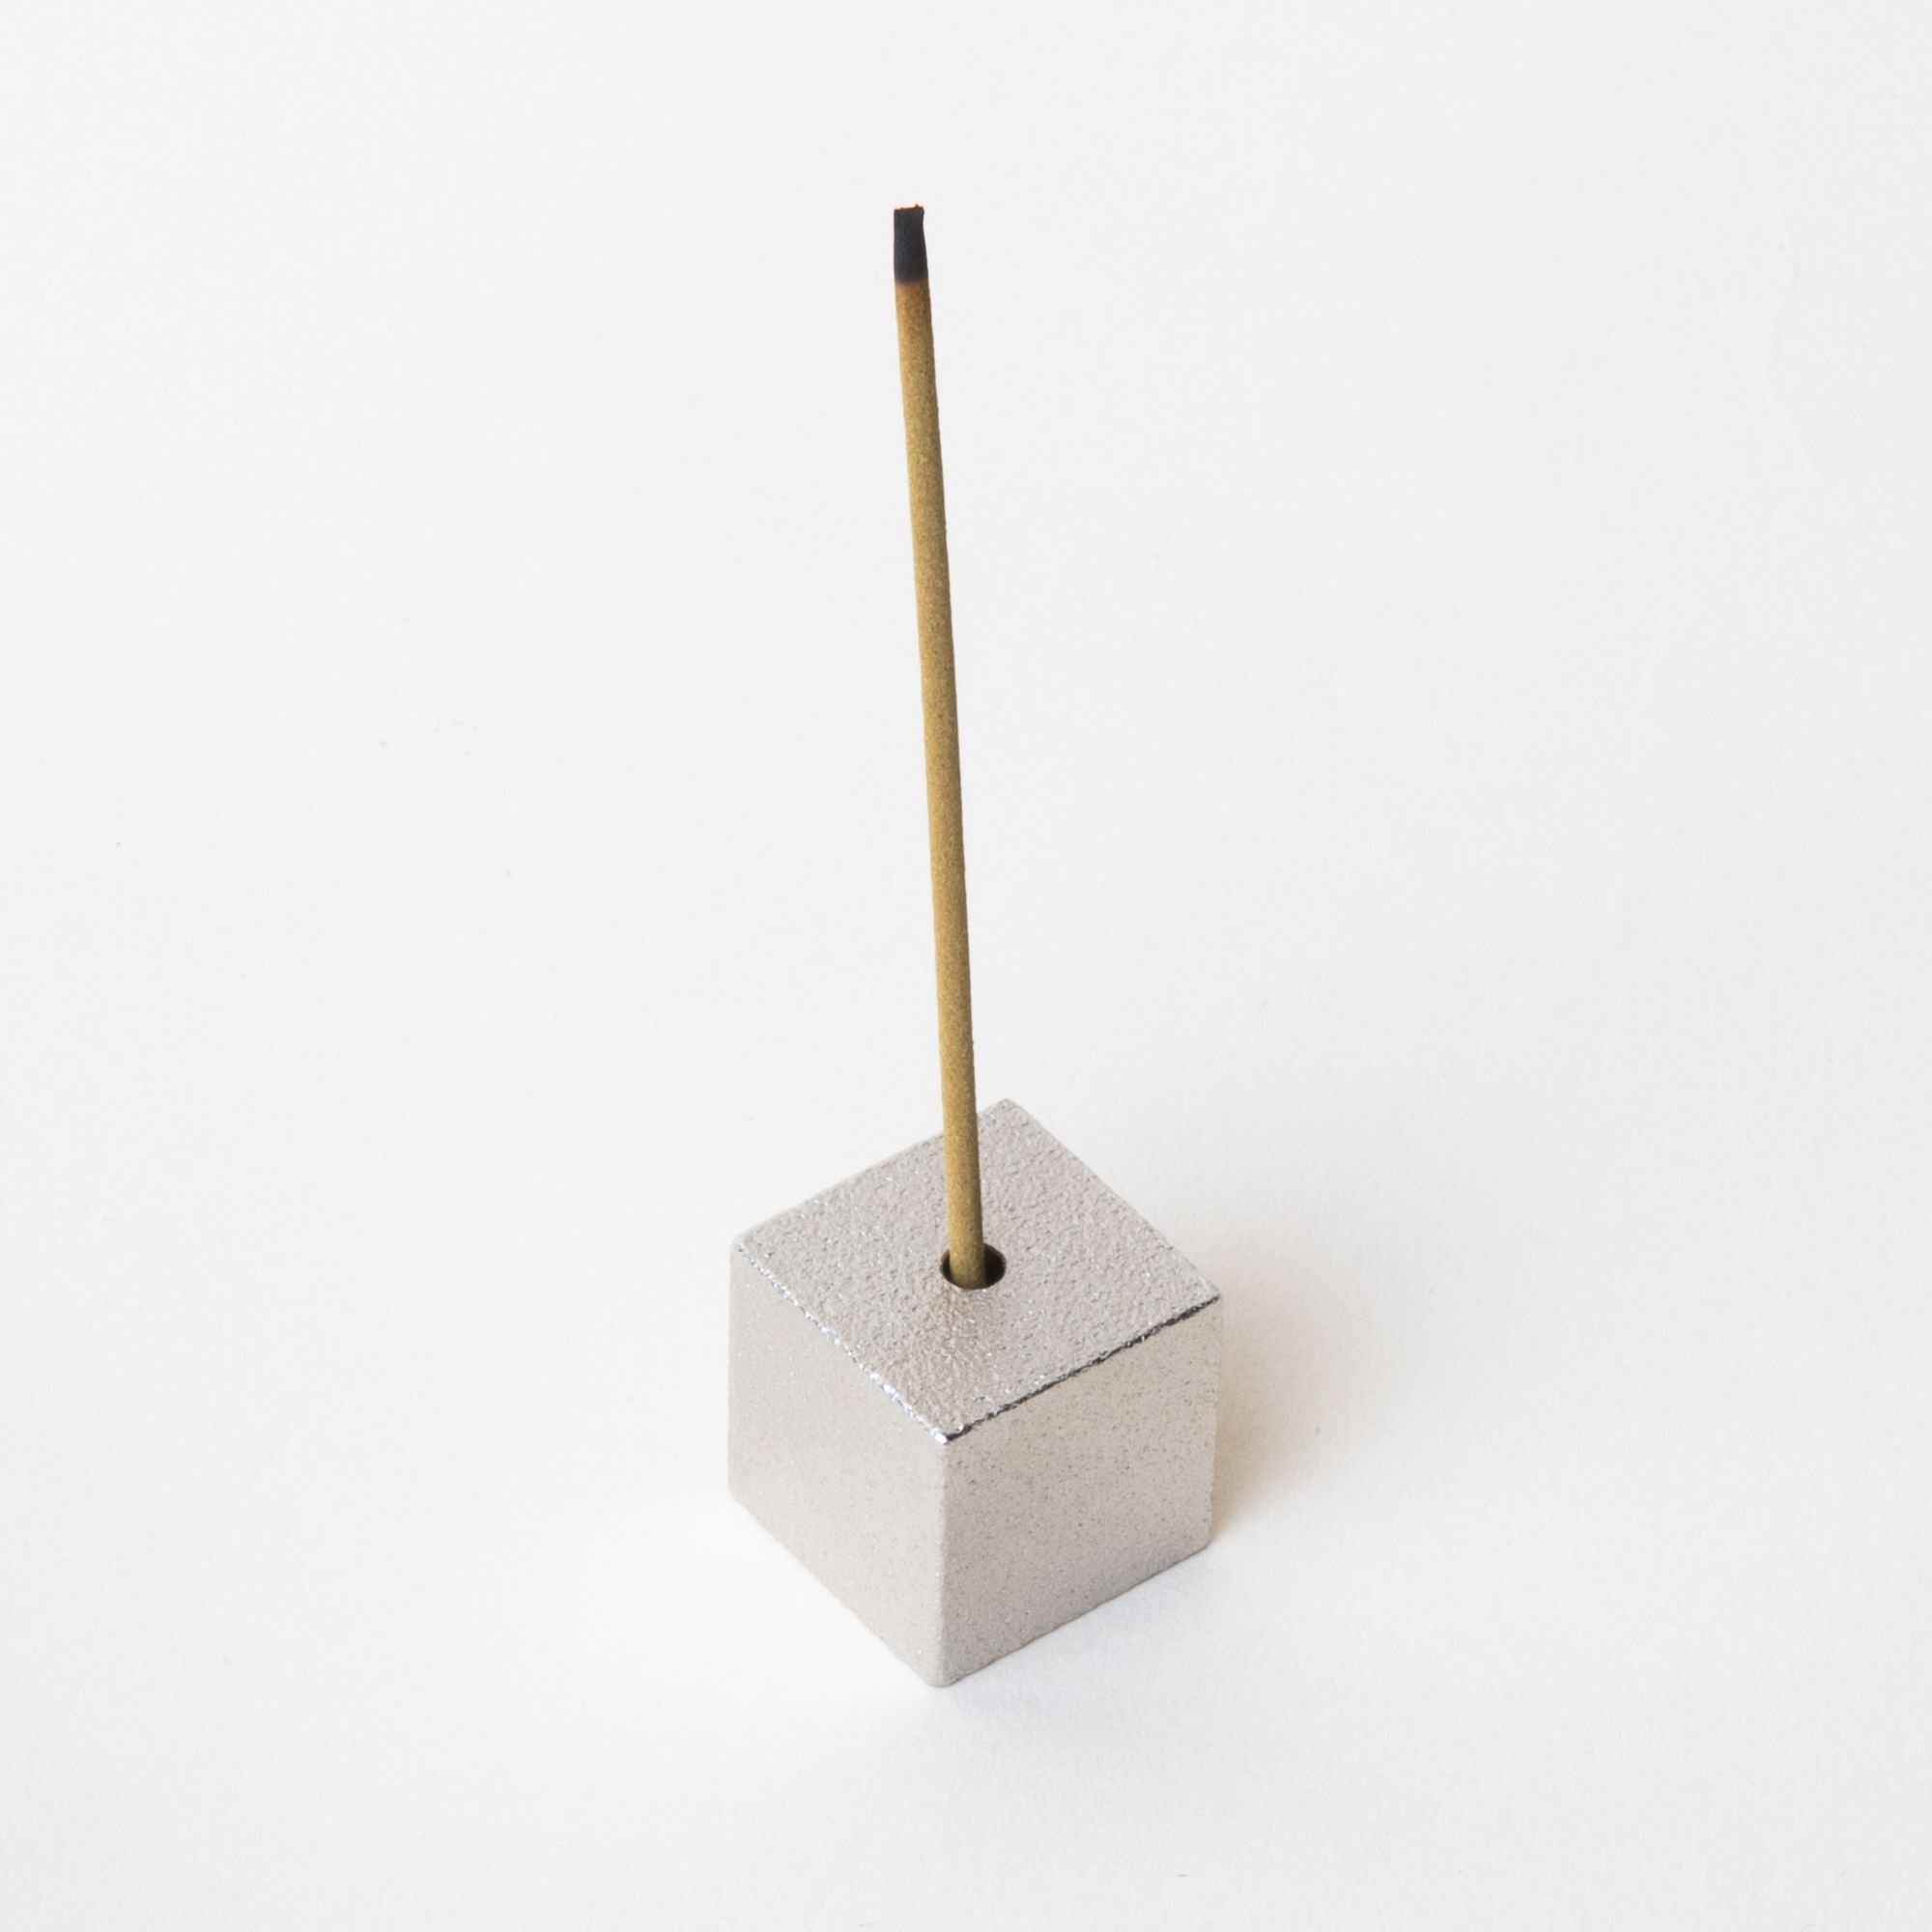 Minimal cube made of pewter with incense sitting on top